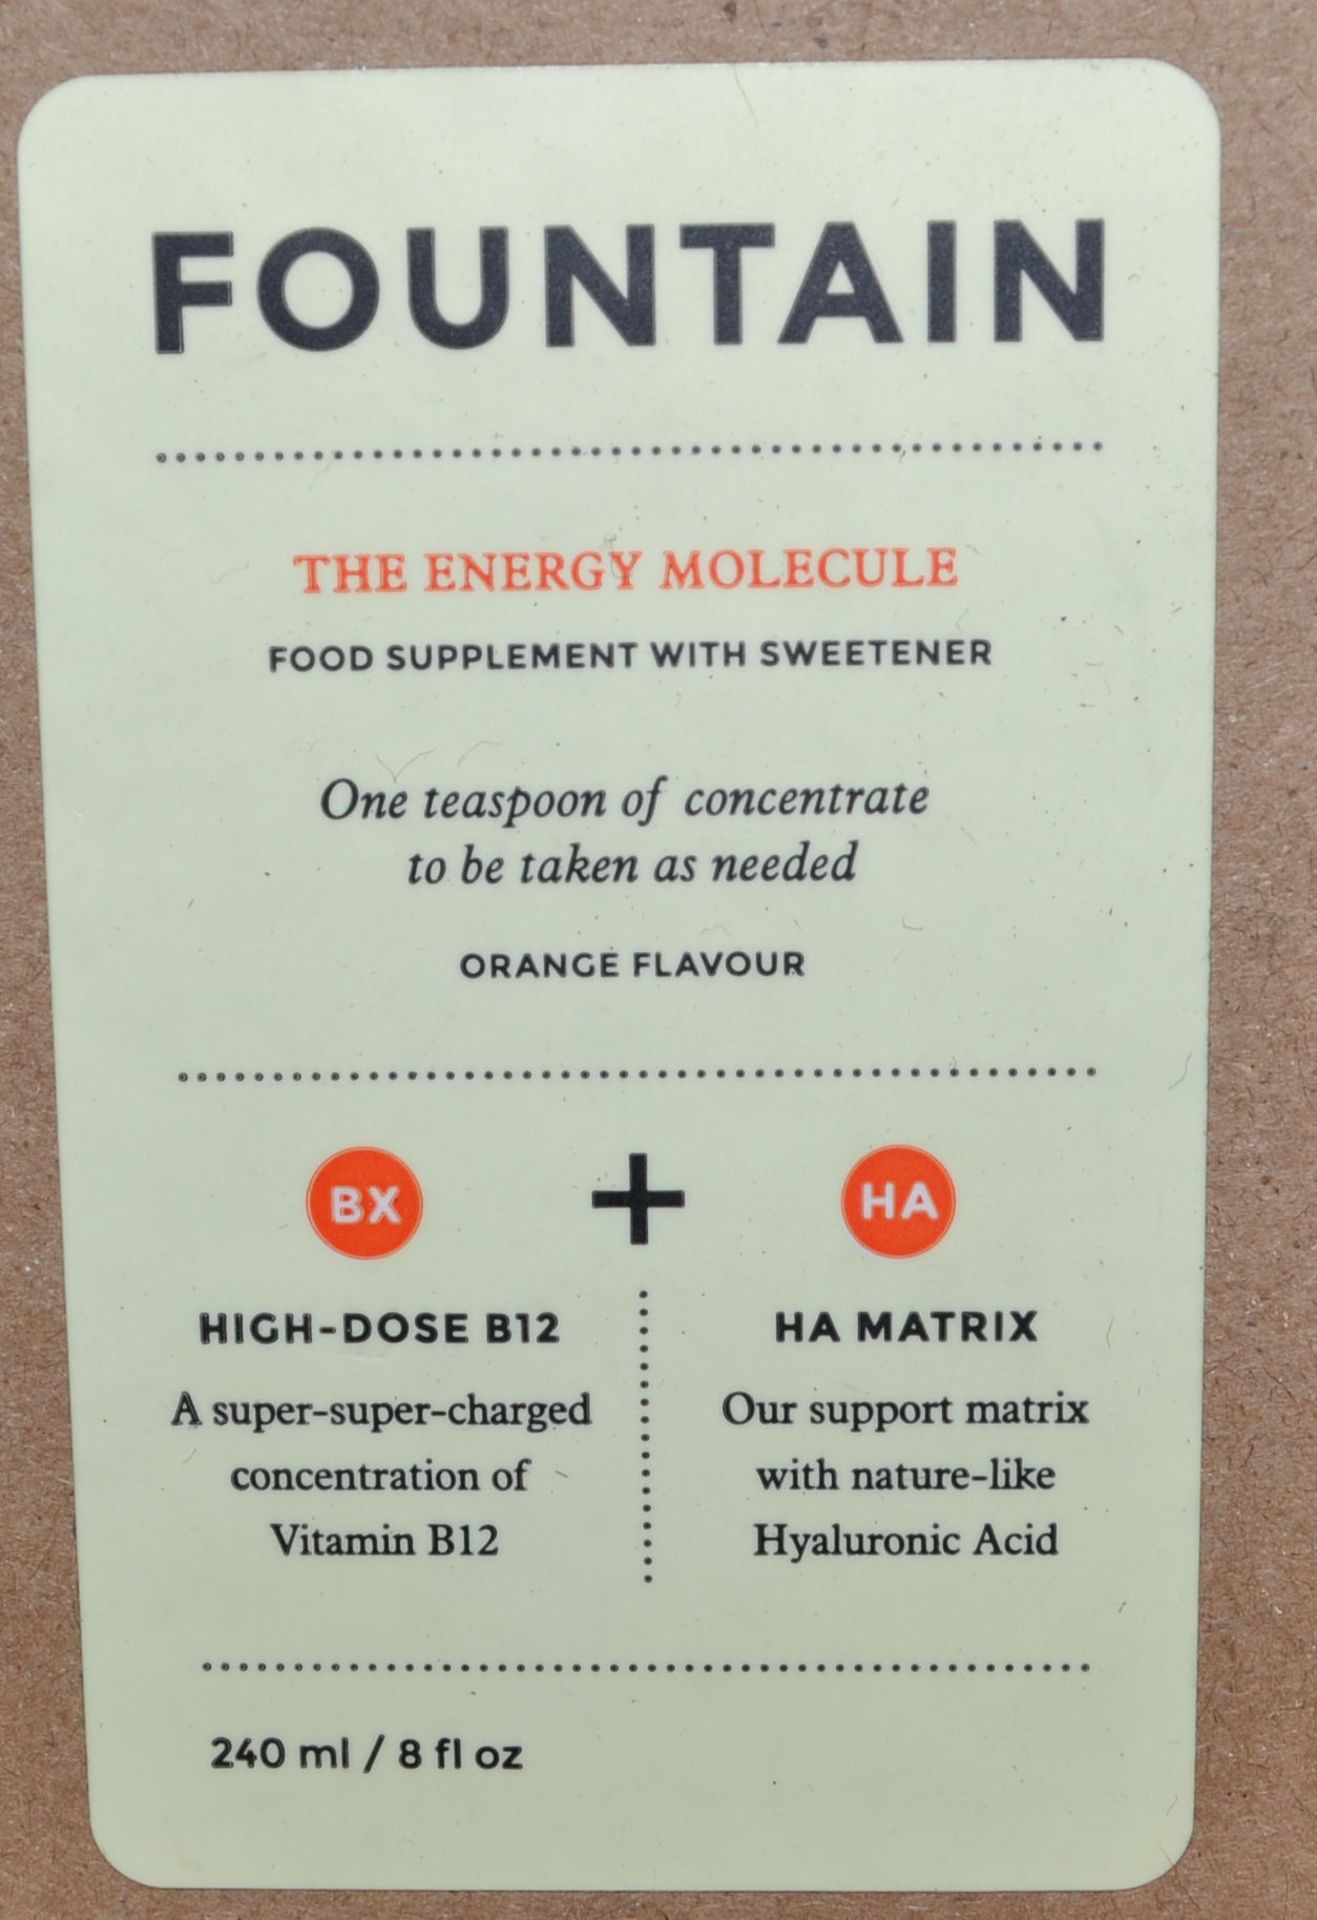 10 x 240ml Bottles of Fountain, The Energy Molecule Supplement - New & Boxed - CL185 - Ref: DRT0643 - Image 3 of 7